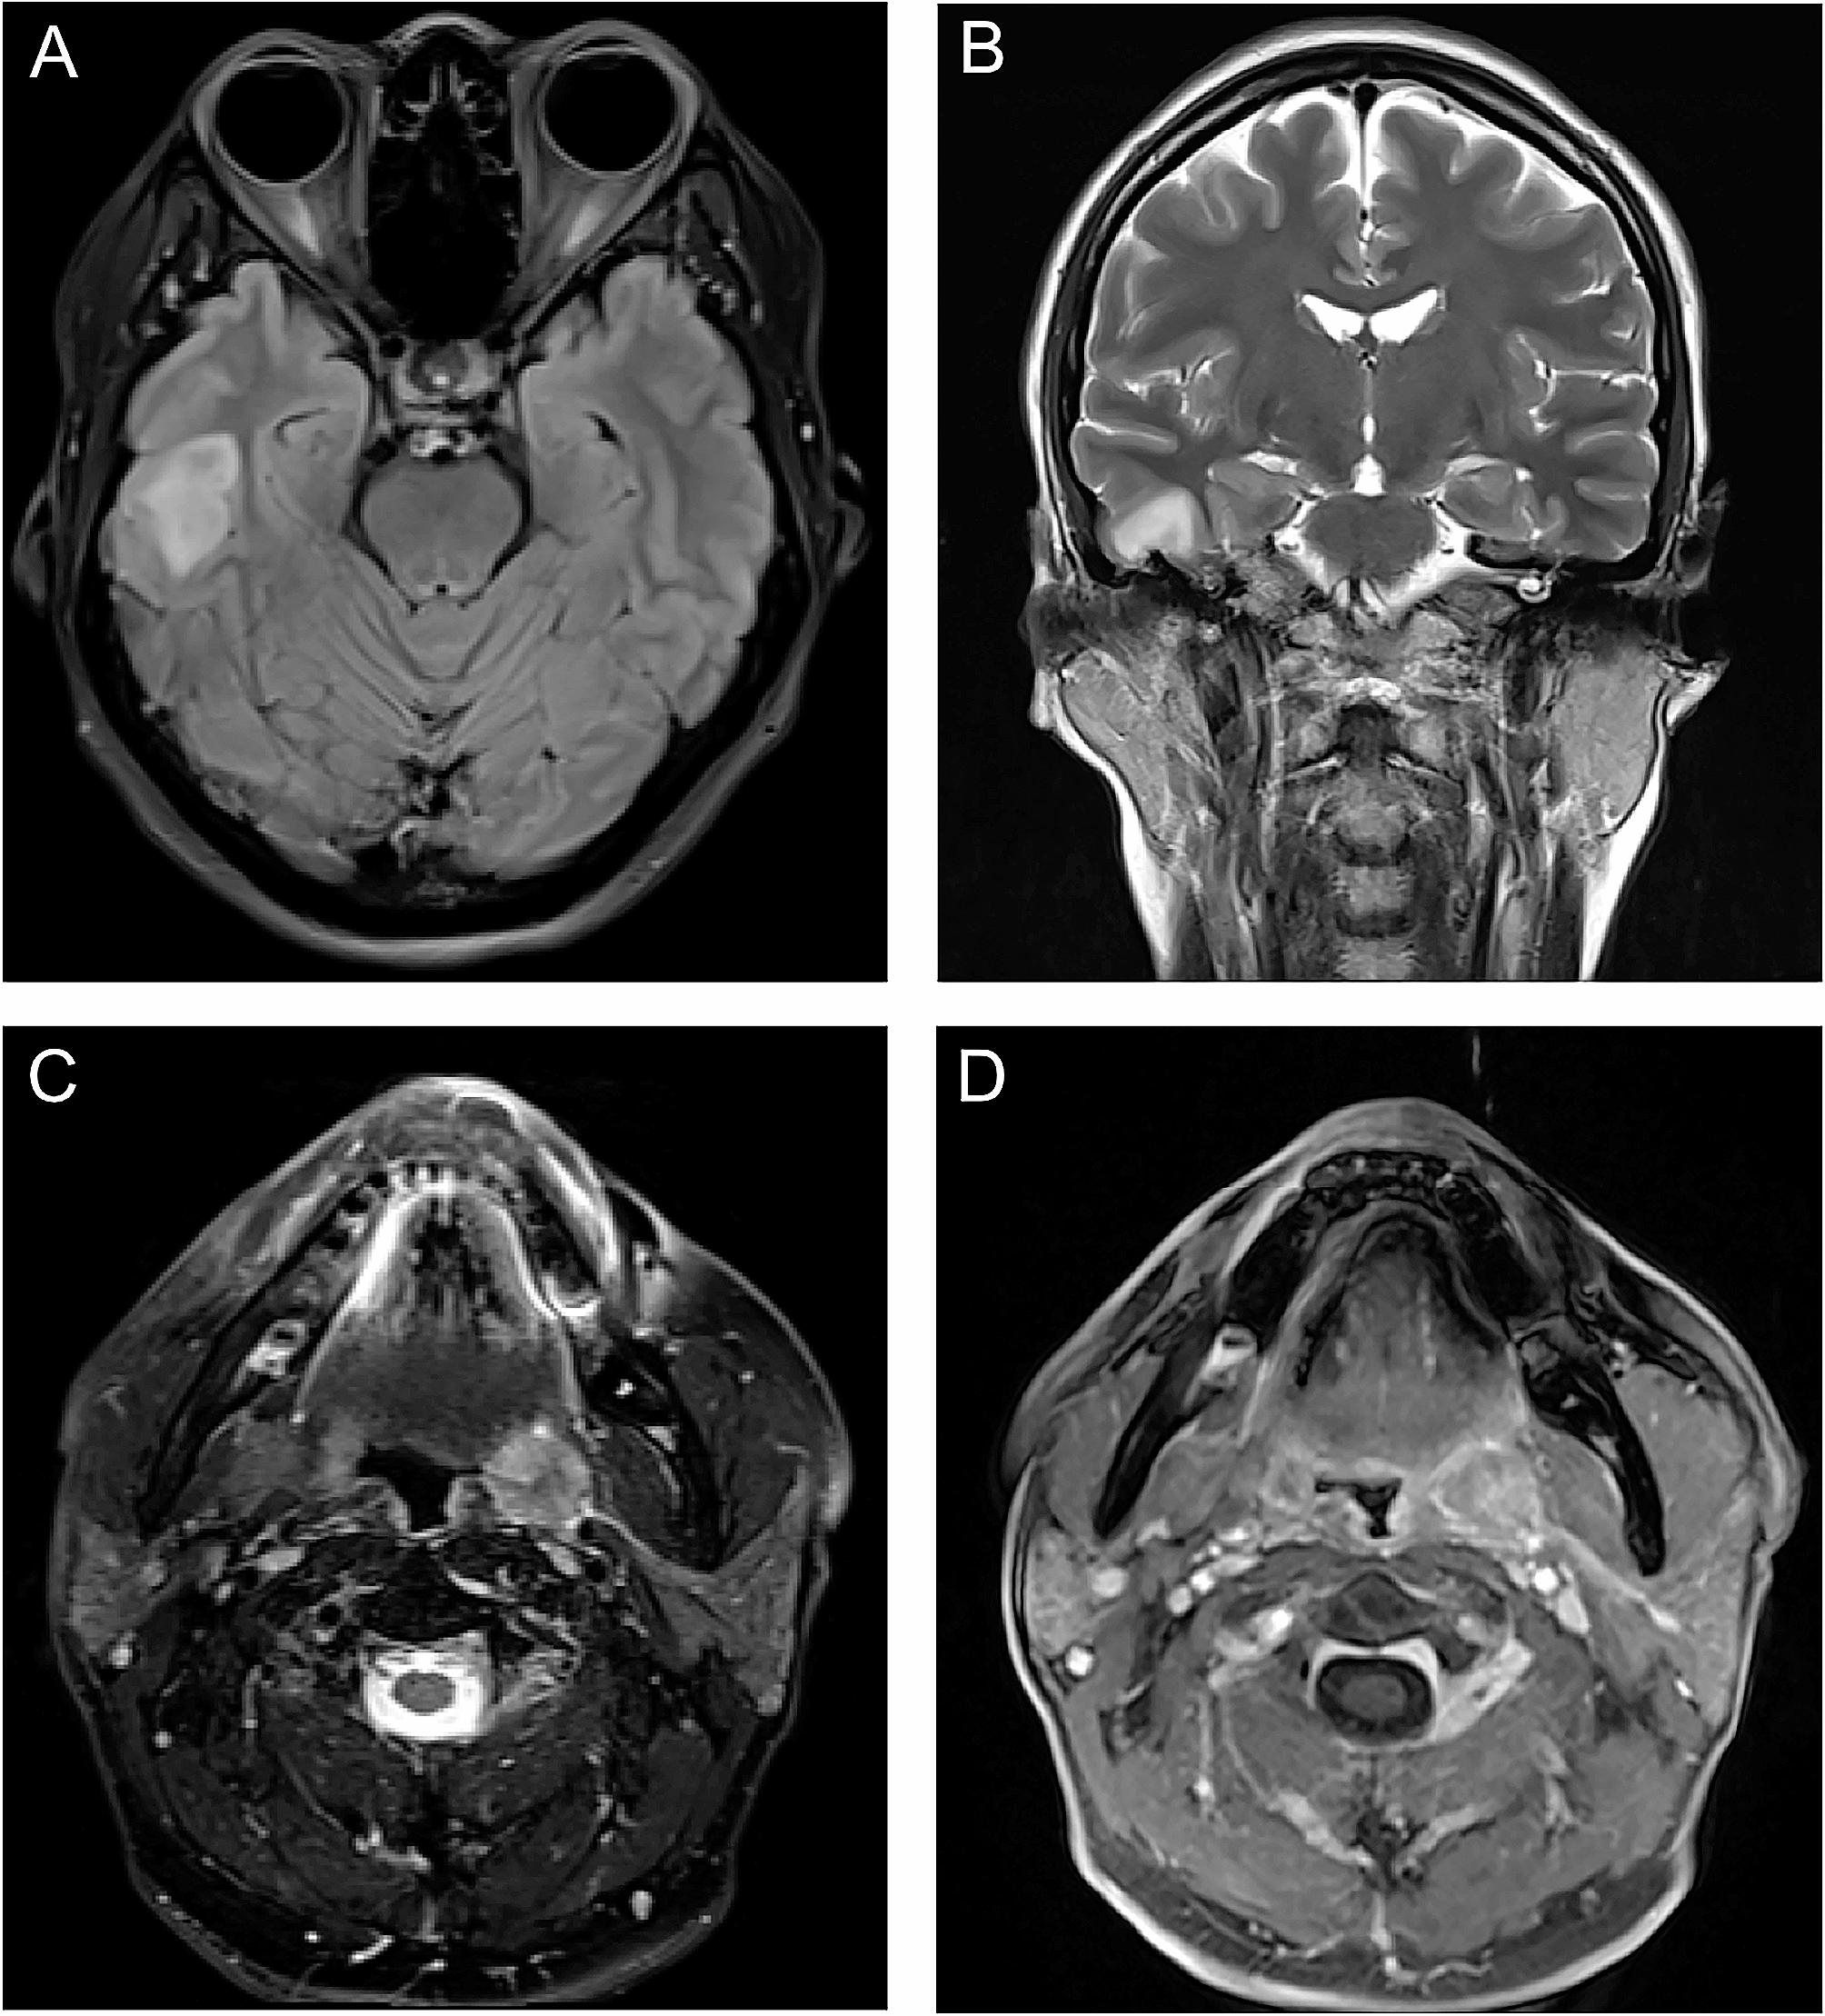 Applying ONCO-RADS to whole-body MRI cancer screening in a retrospective cohort of asymptomatic individuals